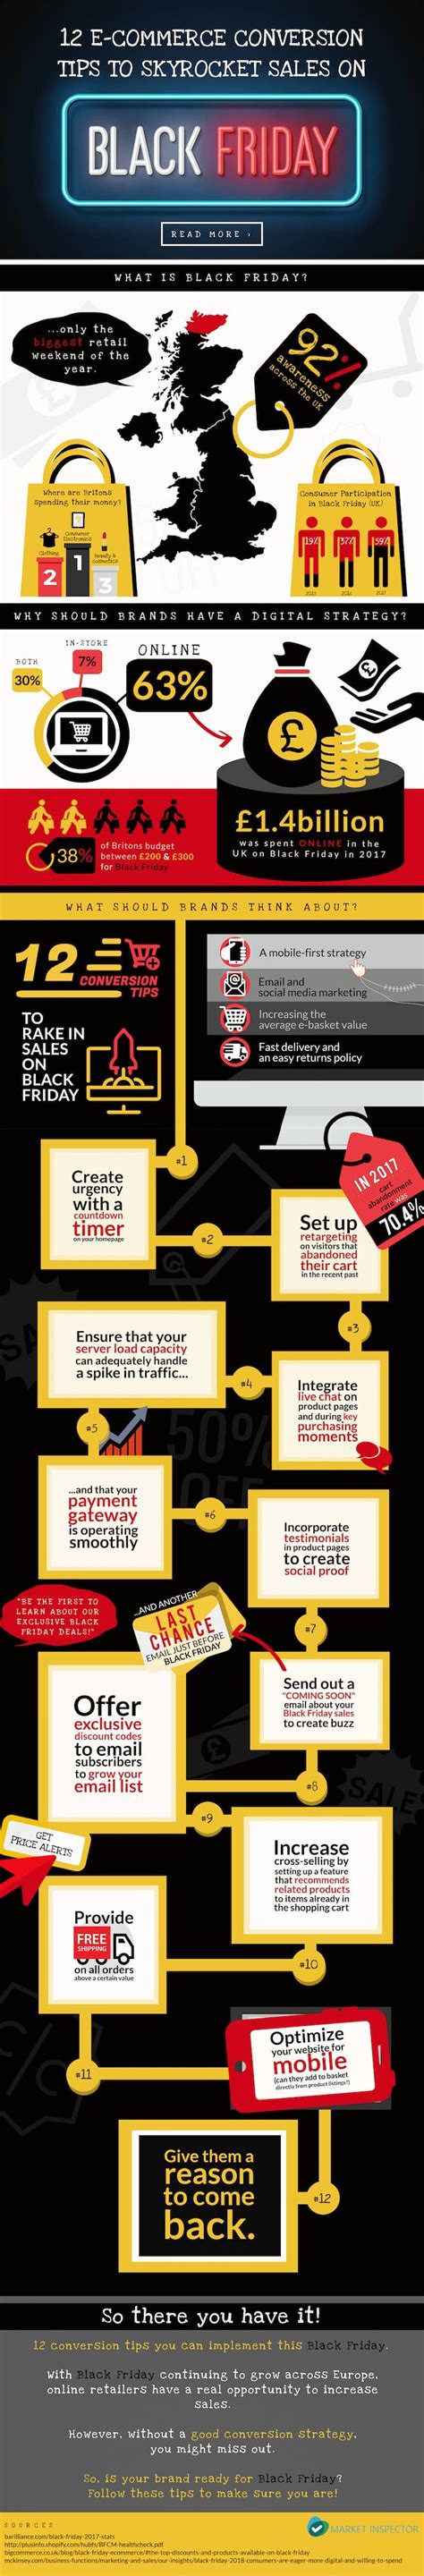 minute ecommerce tips  black friday cyber monday